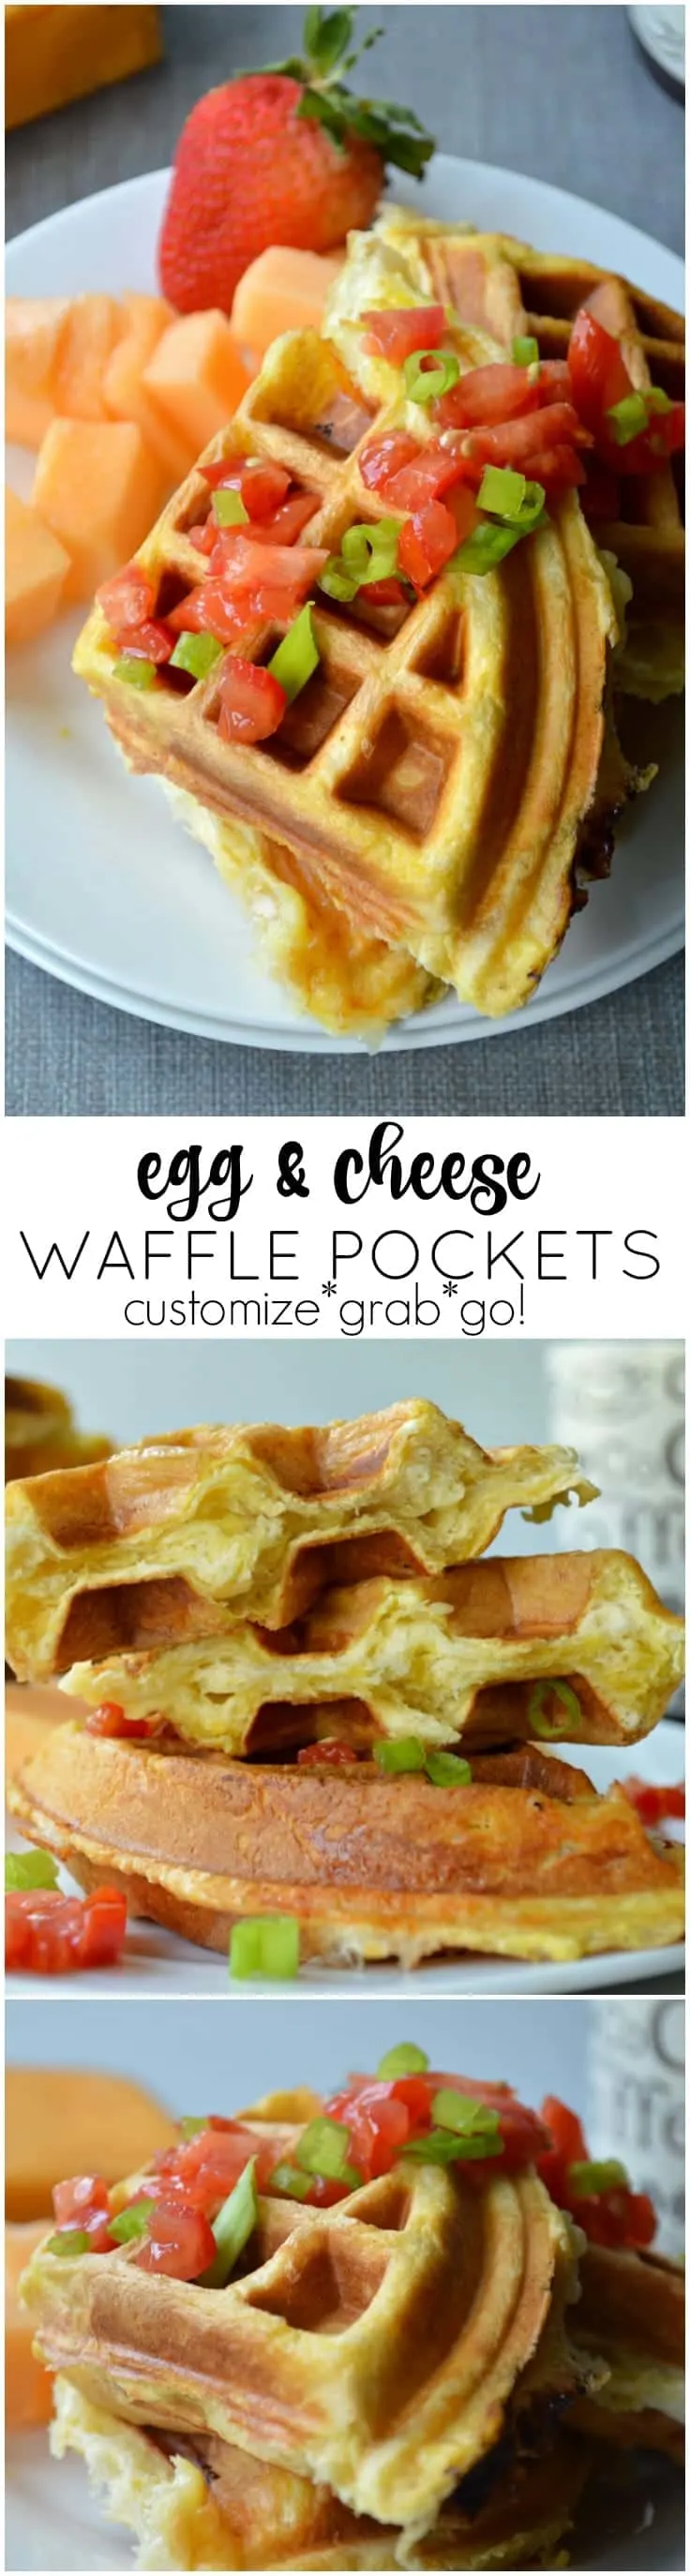 These Egg and Cheese Waffle Pockets are the easiest breakfast on the go! Made with refrigerated biscuit dough, it's simple to change the flavor to suit you!